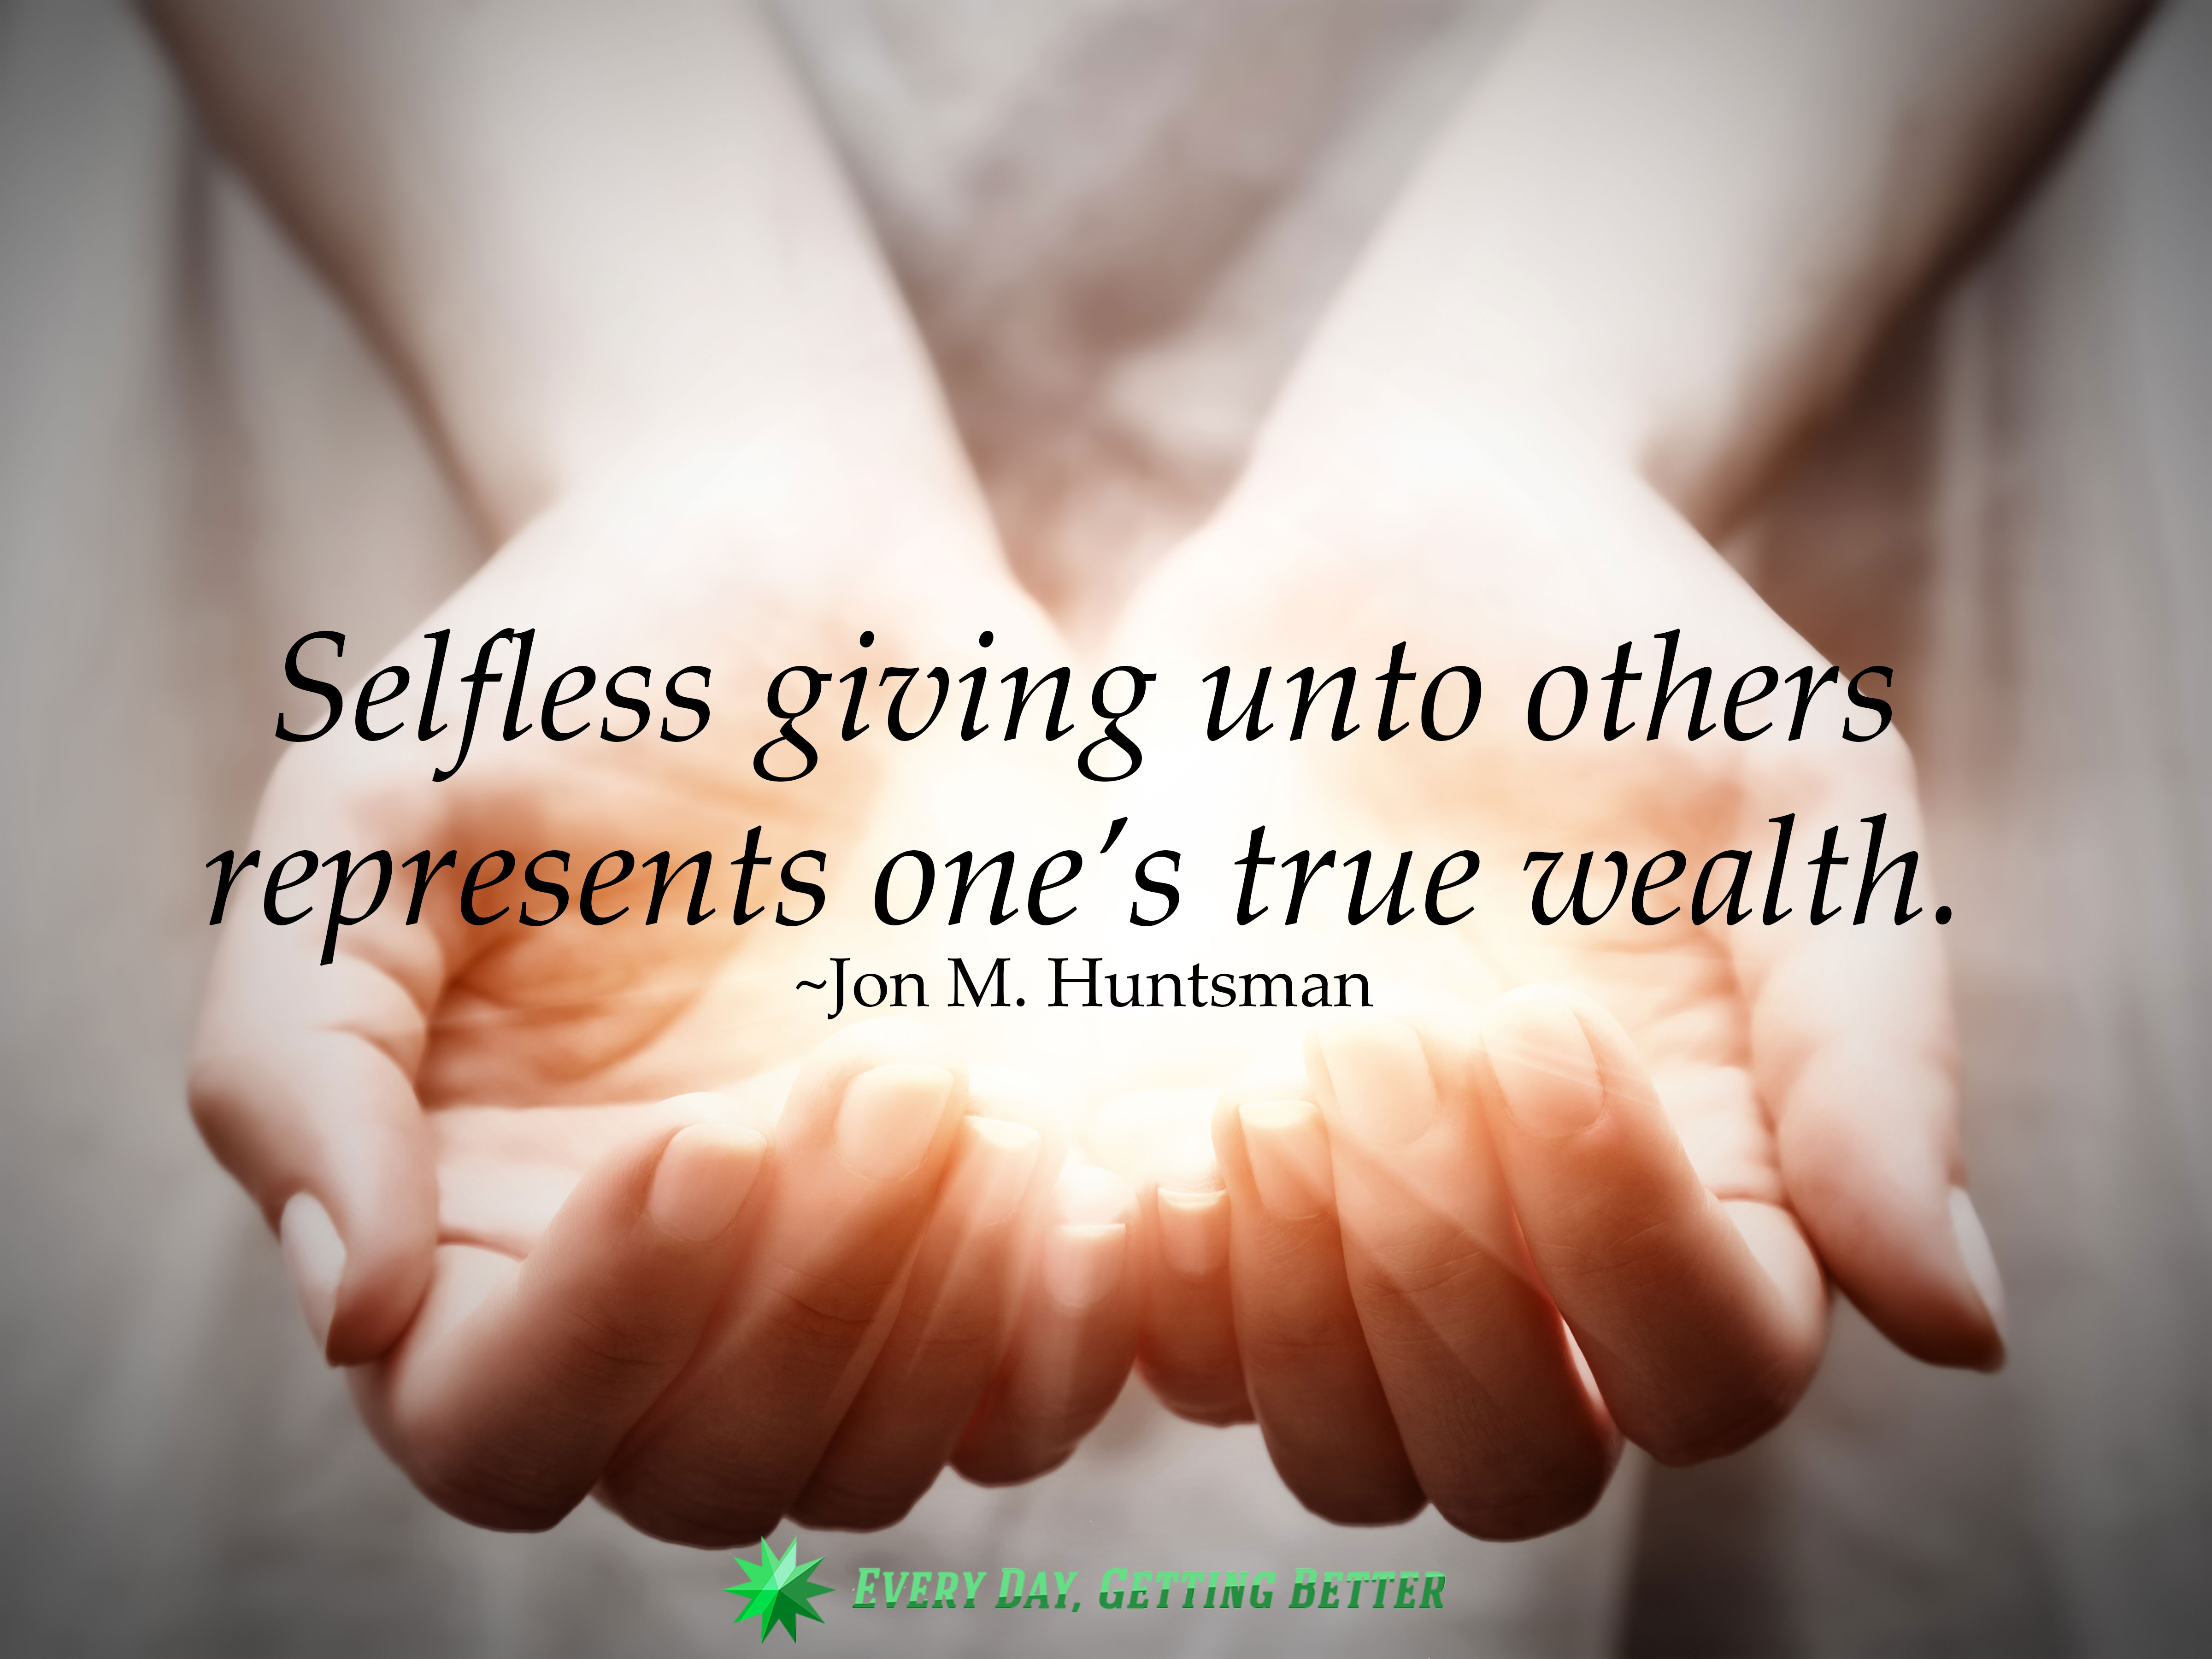 Quotes About Giving To Others. QuotesGram